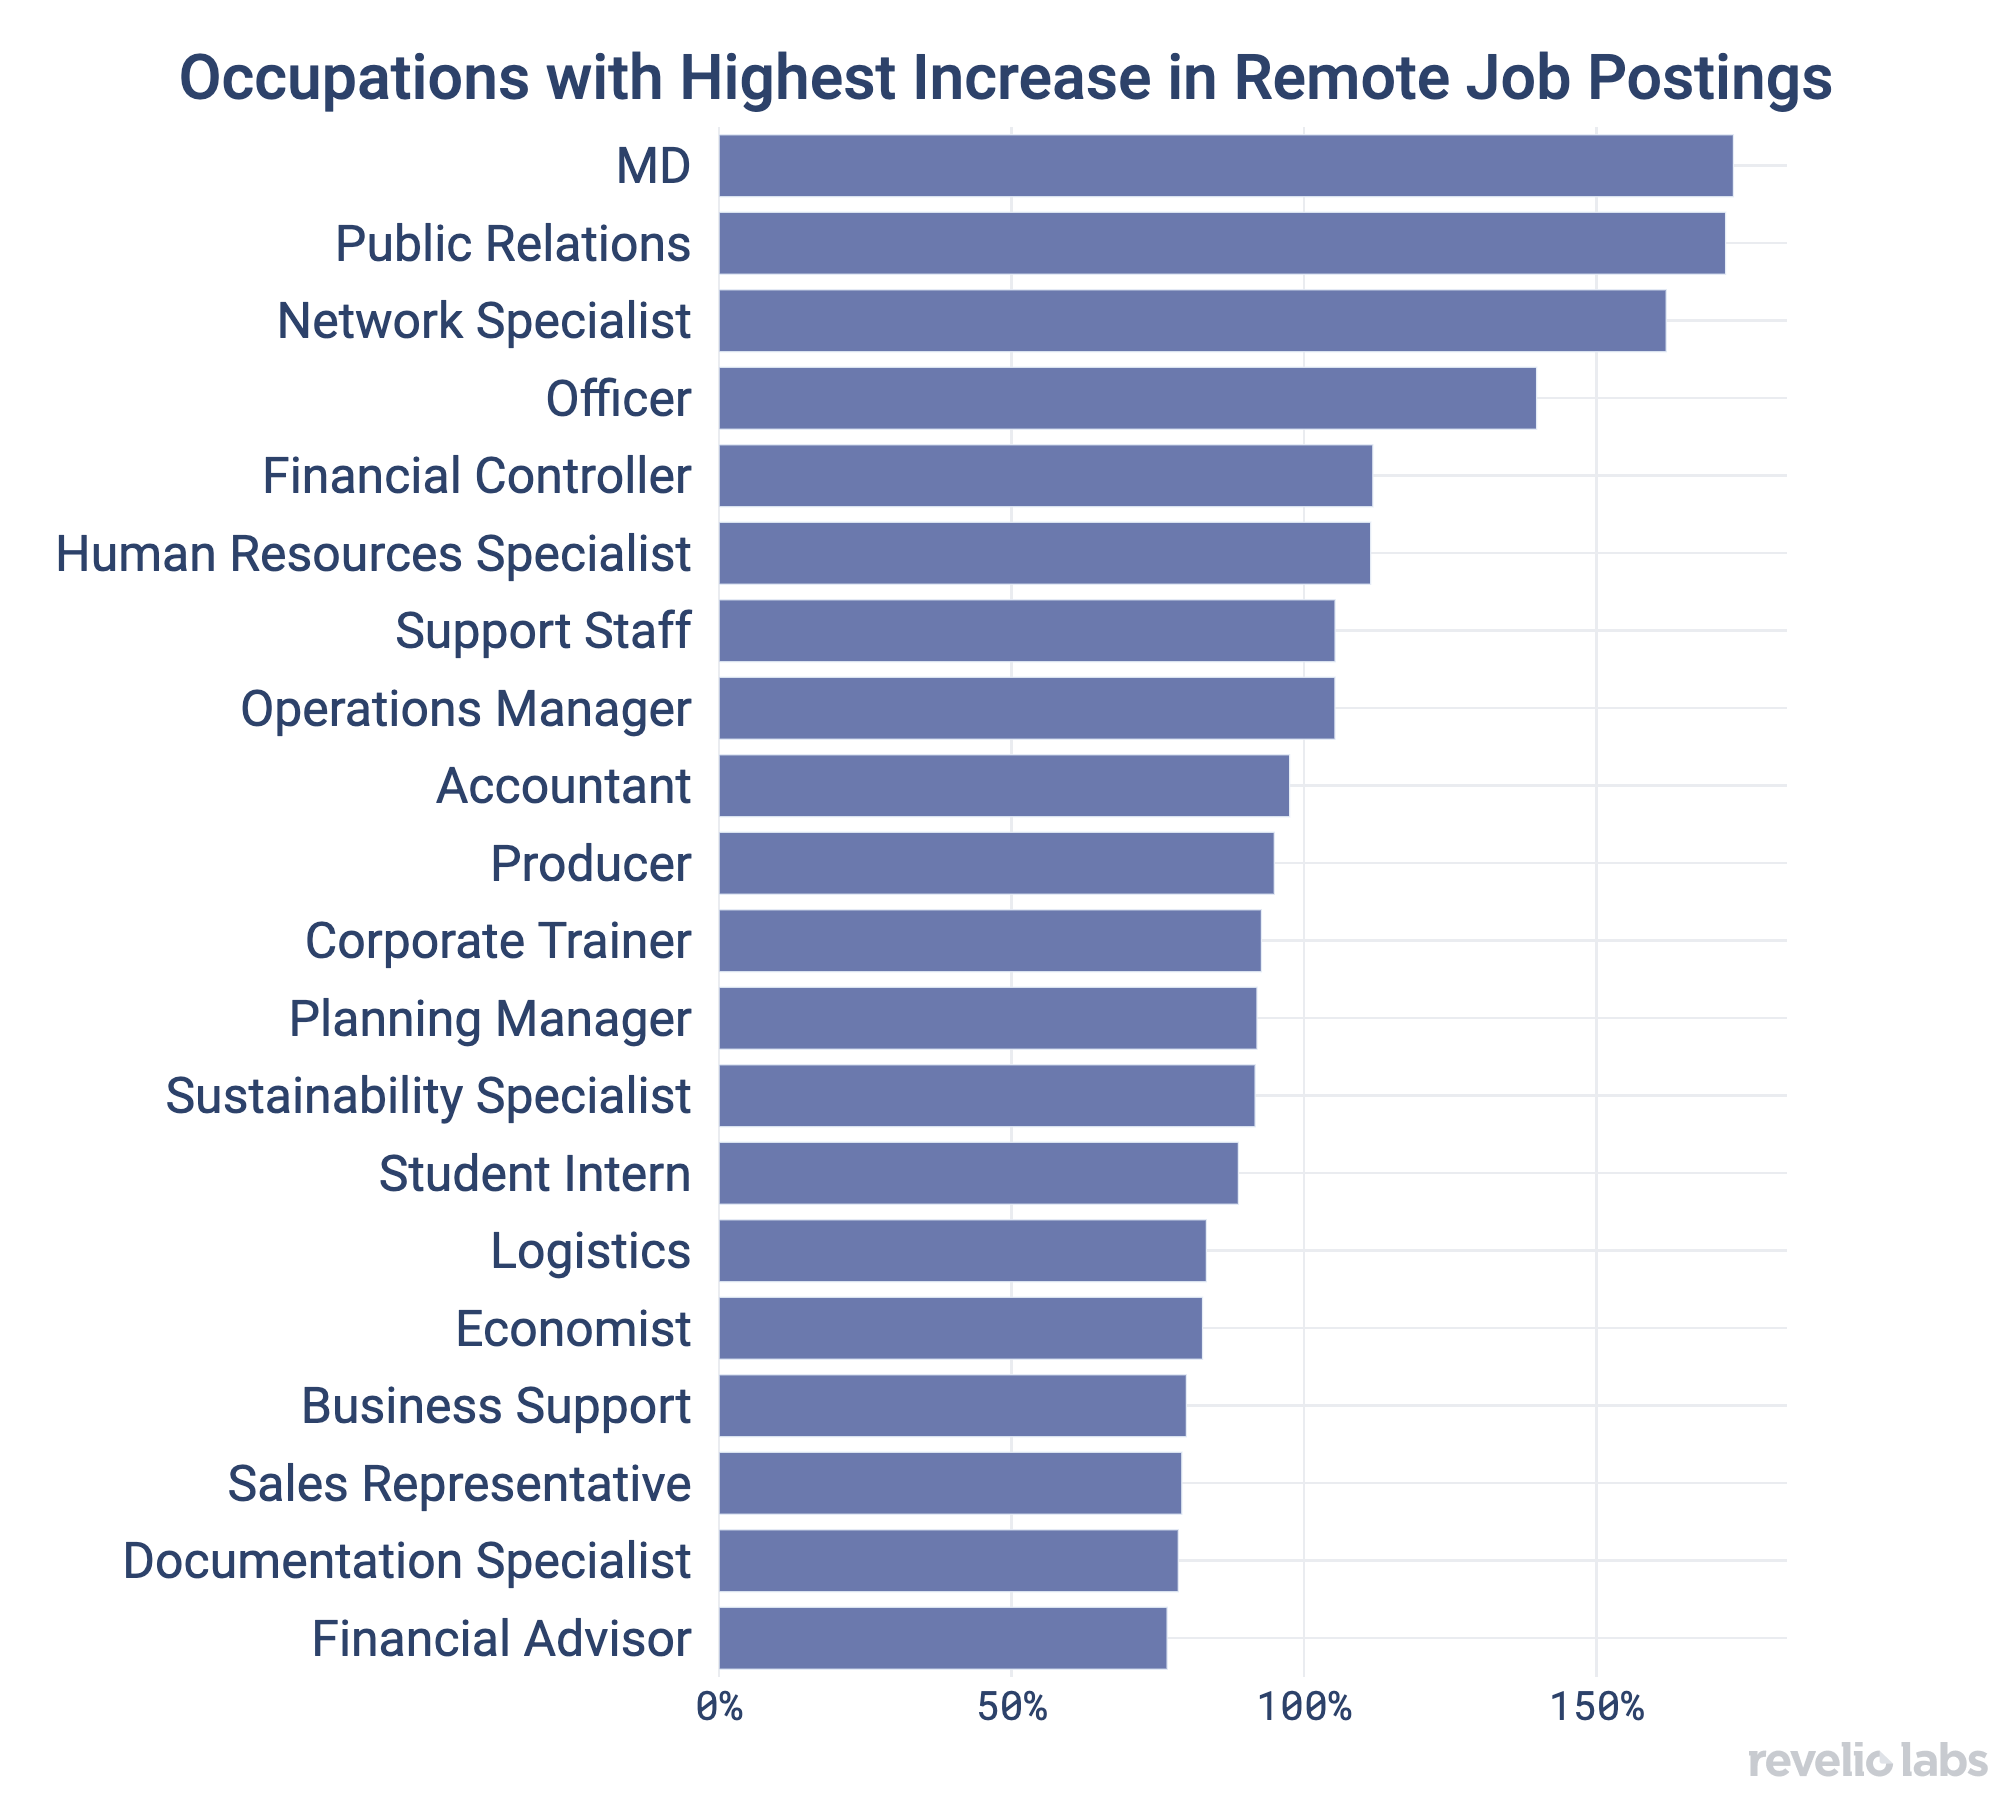 Occupations with Highest Increase in Remote Job Postings